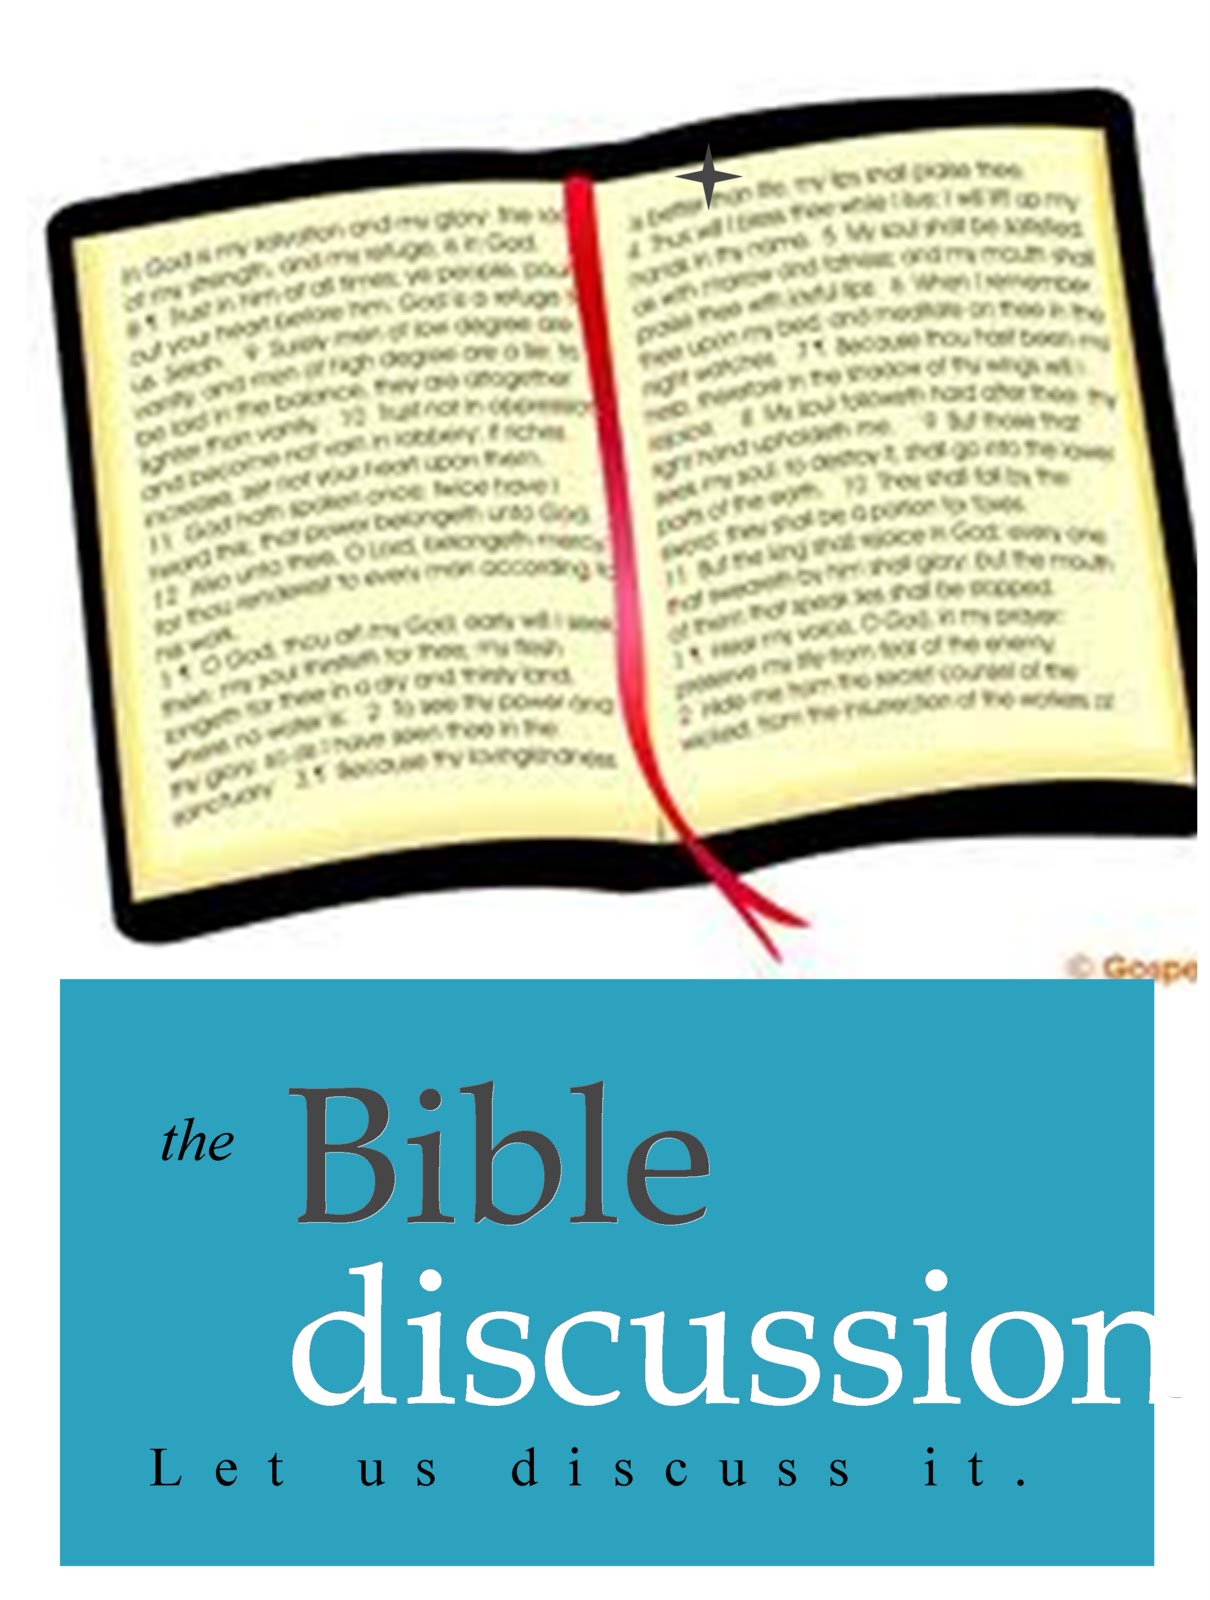 The Opened Bible Discussion